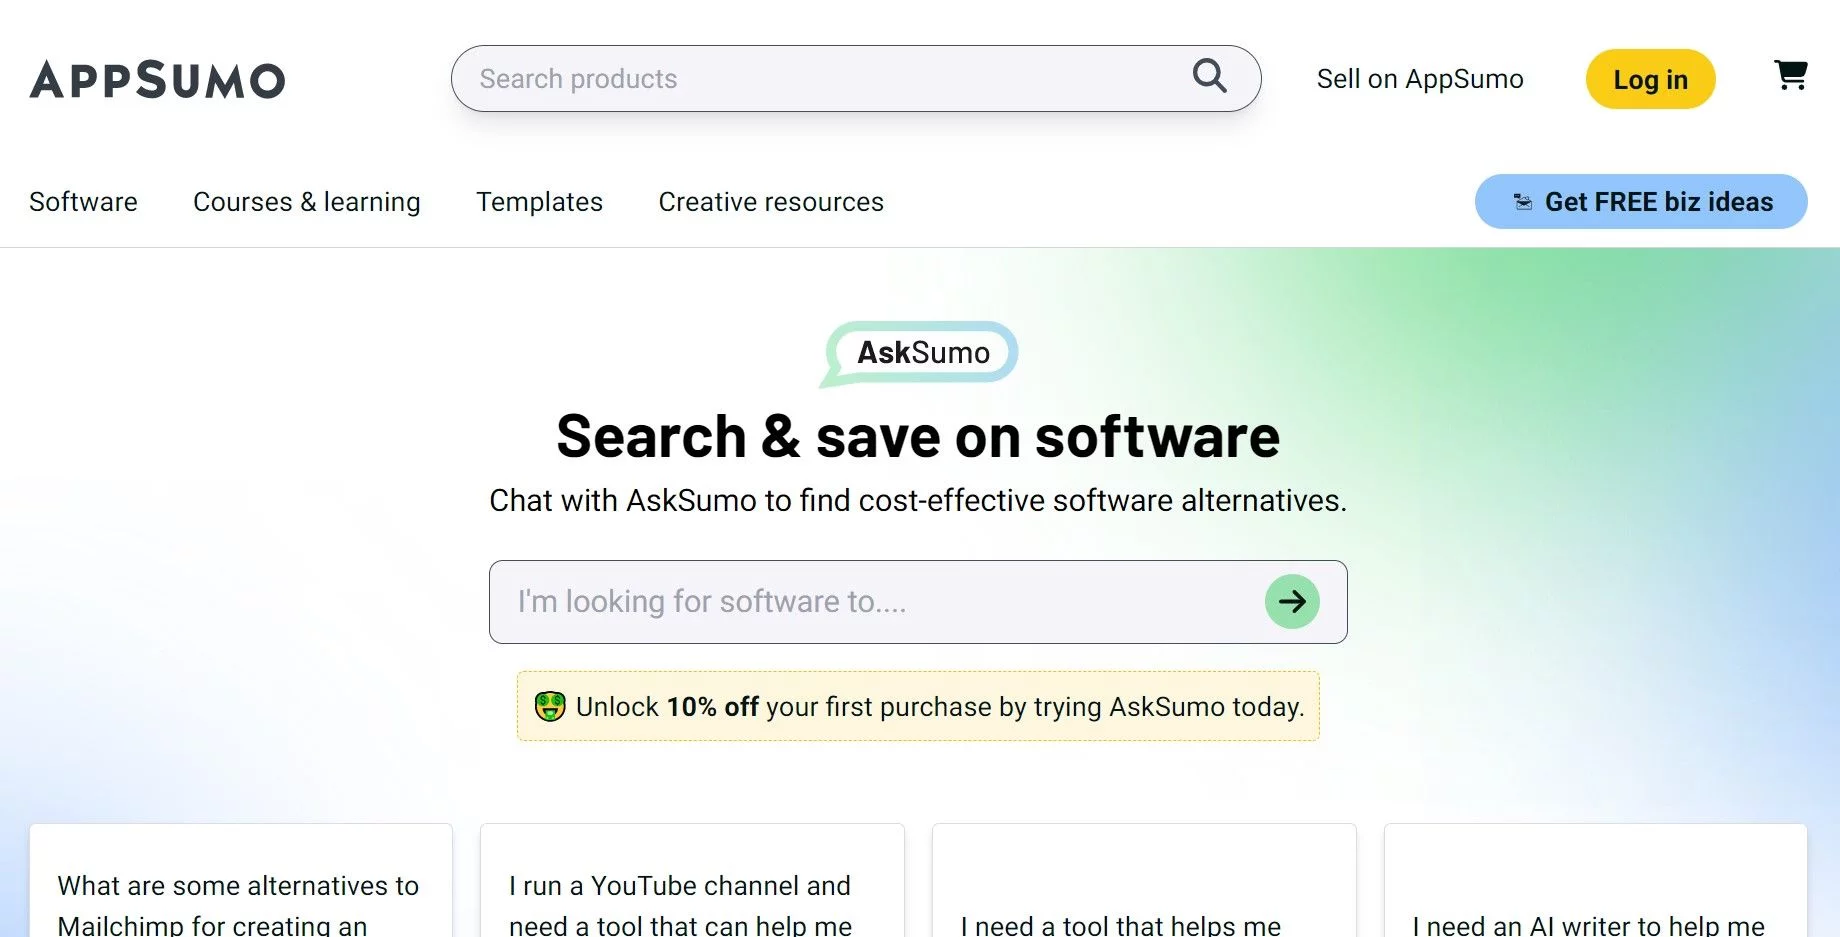  Chat with AskSumo to find cost-effective software